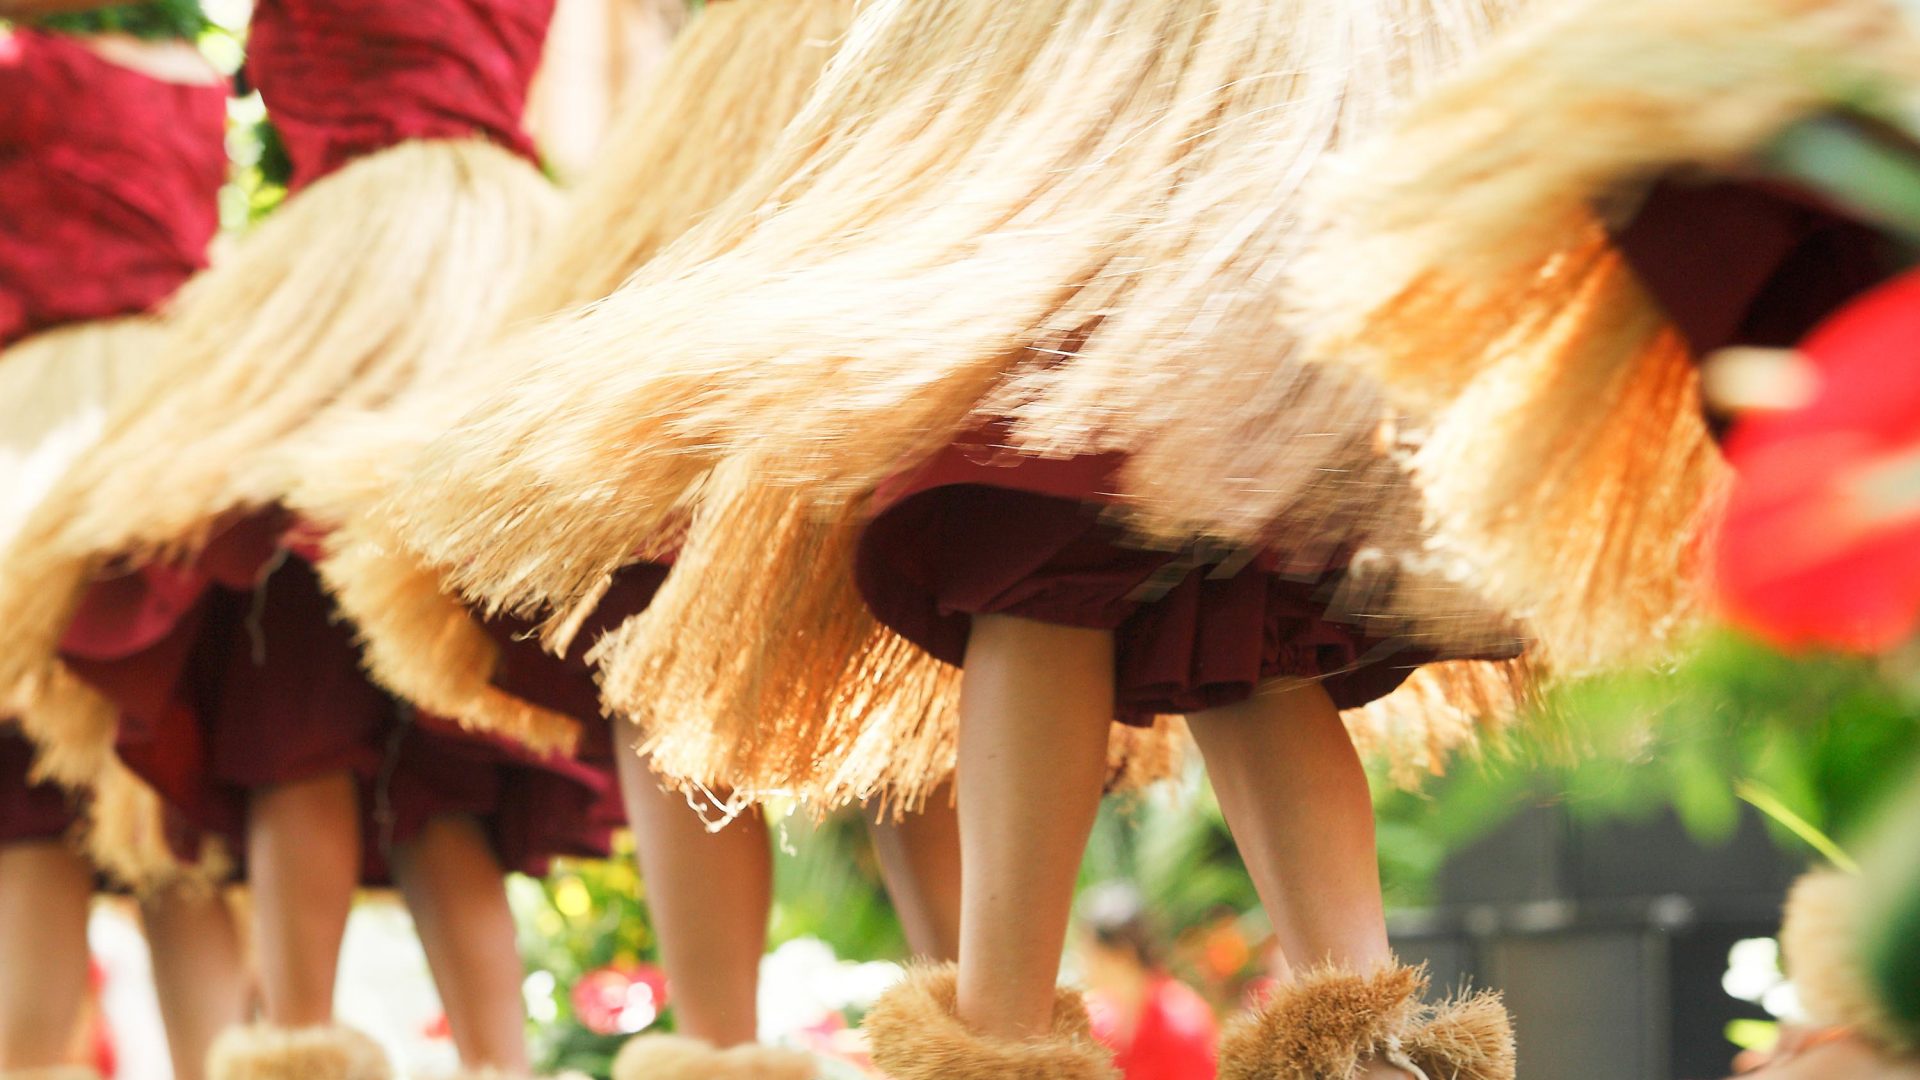 The legs and skirts of some hula dancers.